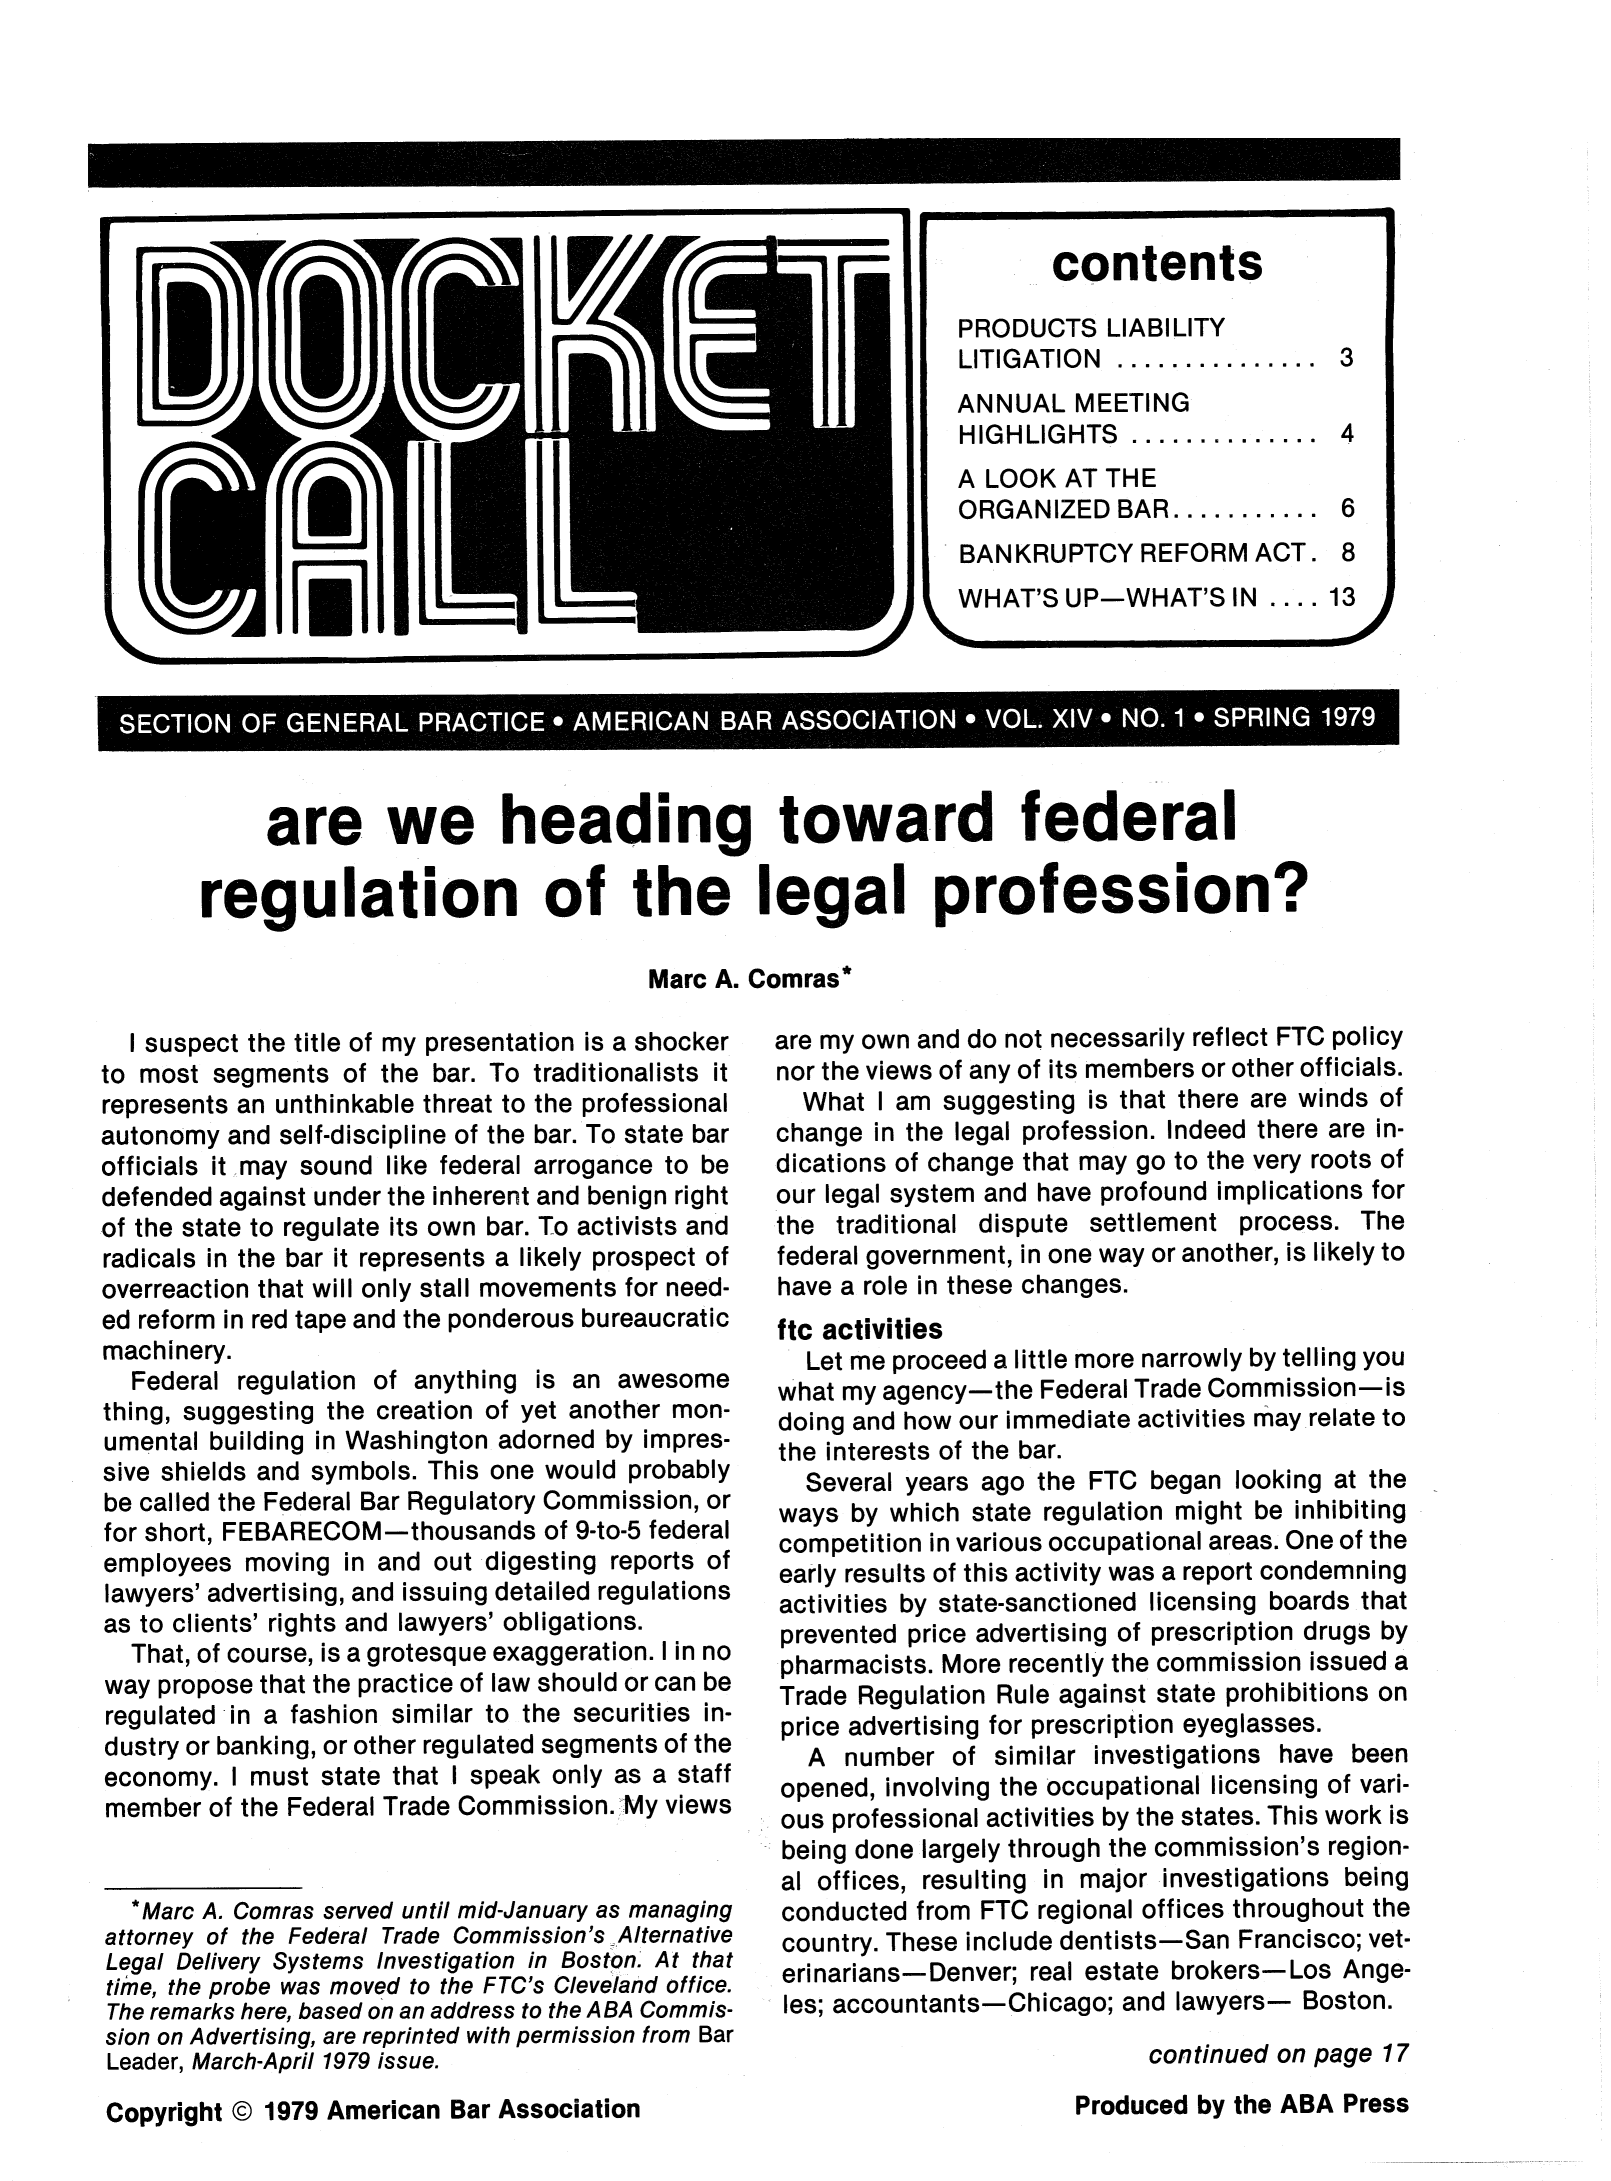 handle is hein.journals/dcktcll14 and id is 1 raw text is: SECTION OF GENERAL..PRACTICE AMERICAN BRASSOCIATION *VOL XIV * NO. 1* SPRING 1979
are we heading toward federal
regulation of the legal profession?
Marc A. Comras*

I suspect the title of my presentation is a shocker
to most segments of the bar. To traditionalists it
represents an unthinkable threat to the professional
autonomy and self-discipline of the bar. To state bar
officials it may sound like federal arrogance to be
defended against under the inherent and benign right
of the state to regulate its own bar. To activists and
radicals in the bar it represents a likely prospect of
overreaction that will only stall movements for need-
ed reform in red tape and the ponderous bureaucratic
machinery.
Federal regulation of anything is an awesome
thing, suggesting the creation of yet another mon-
umental building in Washington adorned by impres-
sive shields and symbols. This one would probably
be called the Federal Bar Regulatory Commission, or
for short, FEBARECOM-thousands of 9-to-5 federal
employees moving in and out digesting reports of
lawyers' advertising, and issuing detailed regulations
as to clients' rights and lawyers' obligations.
That, of course, is a grotesque exaggeration. I in no
way propose that the practice of law should or can be
regulated in a fashion similar to the securities in-
dustry or banking, or other regulated segments of the
economy. I must state that I speak only as a staff
member of the Federal Trade Commission. My views
* Marc A. Comras served until mid-January as managing
attorney of the Federal Trade Commission's Alternative
Legal Delivery Systems Investigation in Boston. At that
time, the probe was moved to the FTC's Cleveland office.
The remarks here, based on an address to the ABA Commis-
sion on Advertising, are reprinted with permission from Bar
Leader, March-April 1979 issue.
Copyright @ 1979 American Bar Association

are my own and do not necessarily reflect FTC policy
nor the views of any of its members or other officials.
What I am suggesting is that there are winds of
change in the legal profession. Indeed there are in-
dications of change that may go to the very roots of
our legal system and have profound implications for
the traditional dispute settlement process. The
federal government, in one way or another, is likely to
have a role in these changes.
ftc activities
Let me proceed a little more narrowly by telling you
what my agency-the Federal Trade Commission-is
doing and how our immediate activities may relate to
the interests of the bar.
Several years ago the FTC began looking at the
ways by which state regulation might be inhibiting
competition in various occupational areas. One of the
early results of this activity was a report condemning
activities by state-sanctioned licensing boards that
prevented price advertising of prescription drugs by
pharmacists. More recently the commission issued a
Trade Regulation Rule against state prohibitions on
price advertising for prescription eyeglasses.
A number of similar investigations have been
opened, involving the occupational licensing of vari-
ous professional activities by the states. This work is
being done largely through the commission's region-
al offices, resulting in major investigations being
conducted from FTC regional offices throughout the
country. These include dentists-San Francisco; vet-
eri narians- Denver; real estate brokers-Los Ange-
les; accountants-Chicago; and lawyers- Boston.
continued on page 17
Produced by the ABA Press


